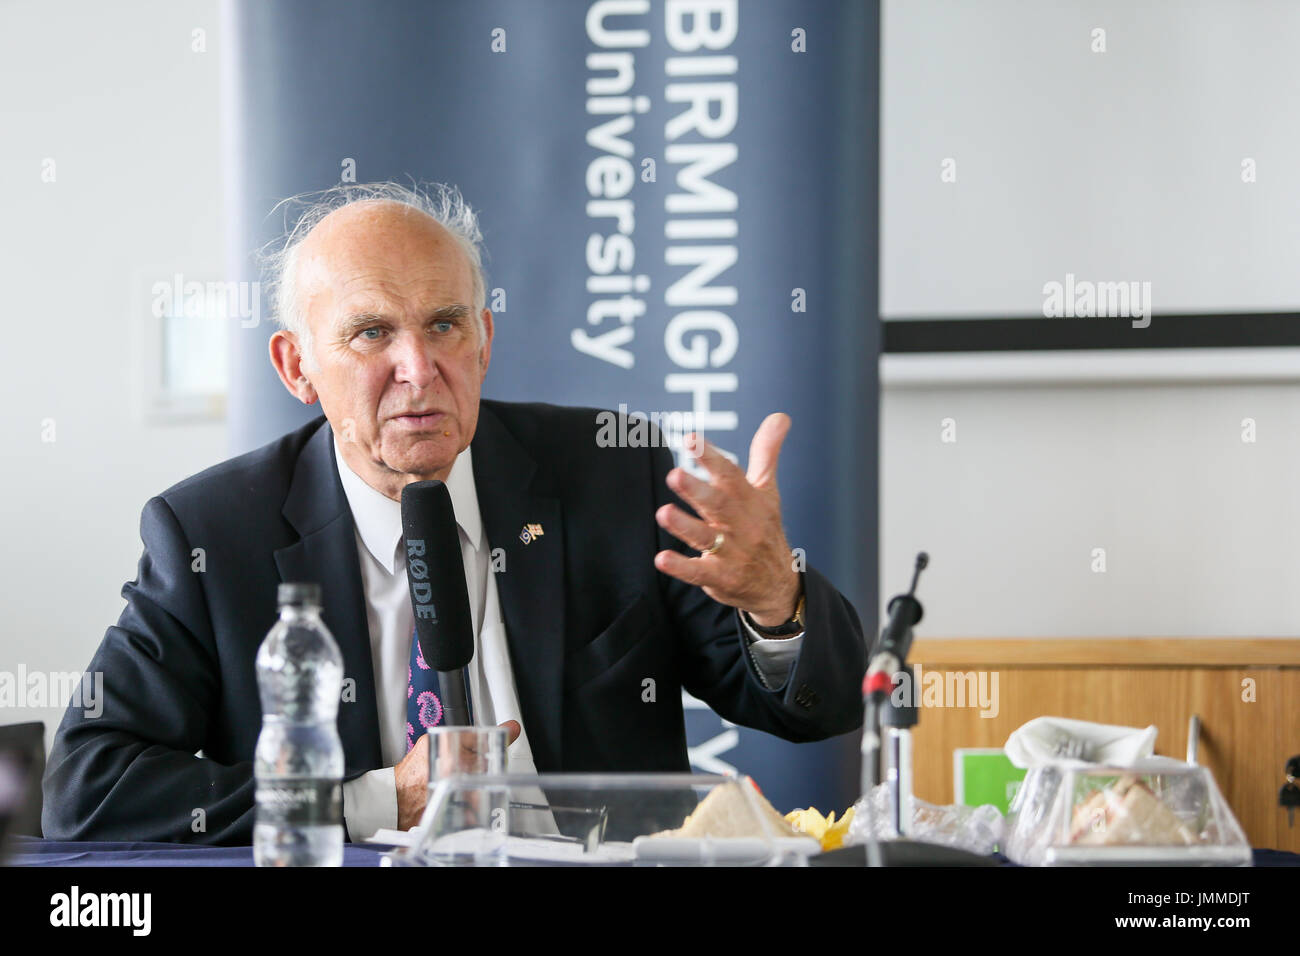 Birmingham, UK. 28th July, 2017. Recently-elected leader of the Liberal Democrat party for the UK, Sir Vince Cable, addresses a discussion group made up of university staff and students as well as business owners at Birmingham City University's Centre for Brexit Studies. Credit: Peter Lopeman/Alamy Live News Stock Photo